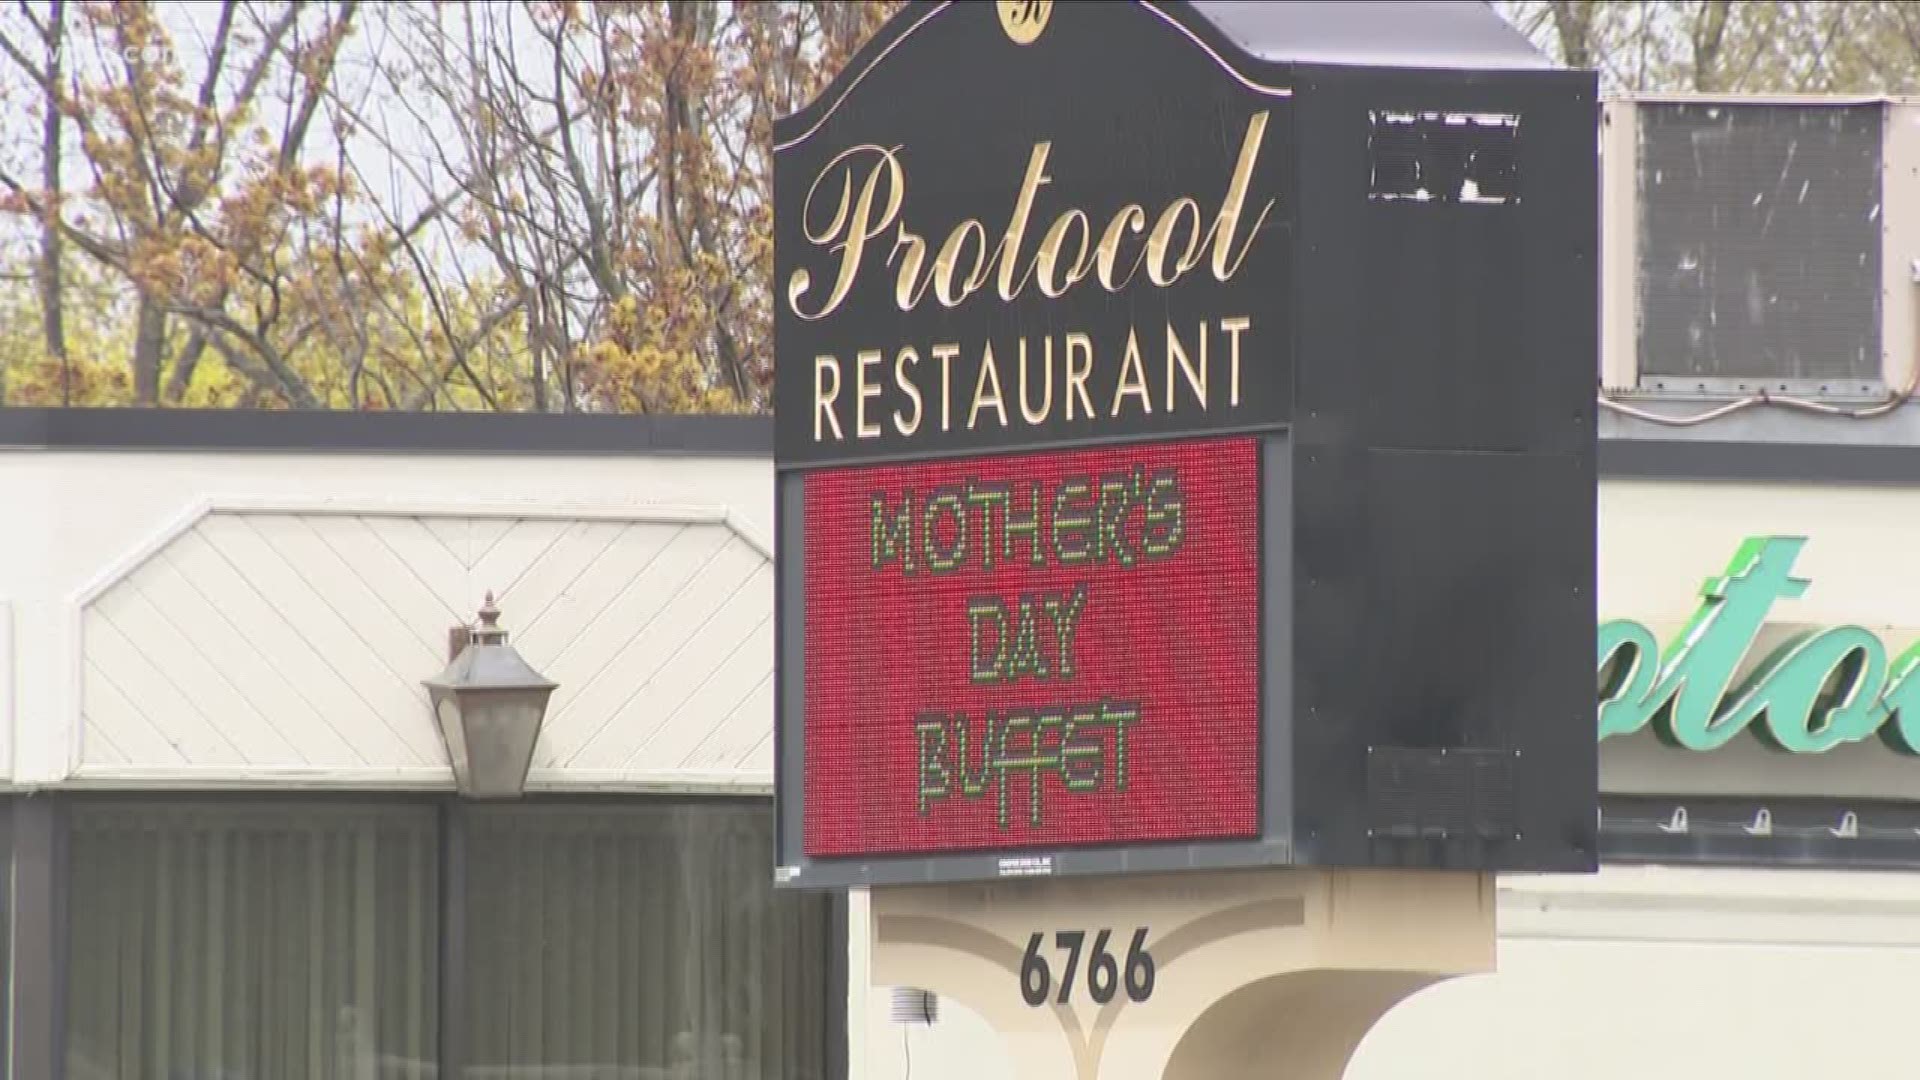 Protocol restaurant owner accused of sexual harassment